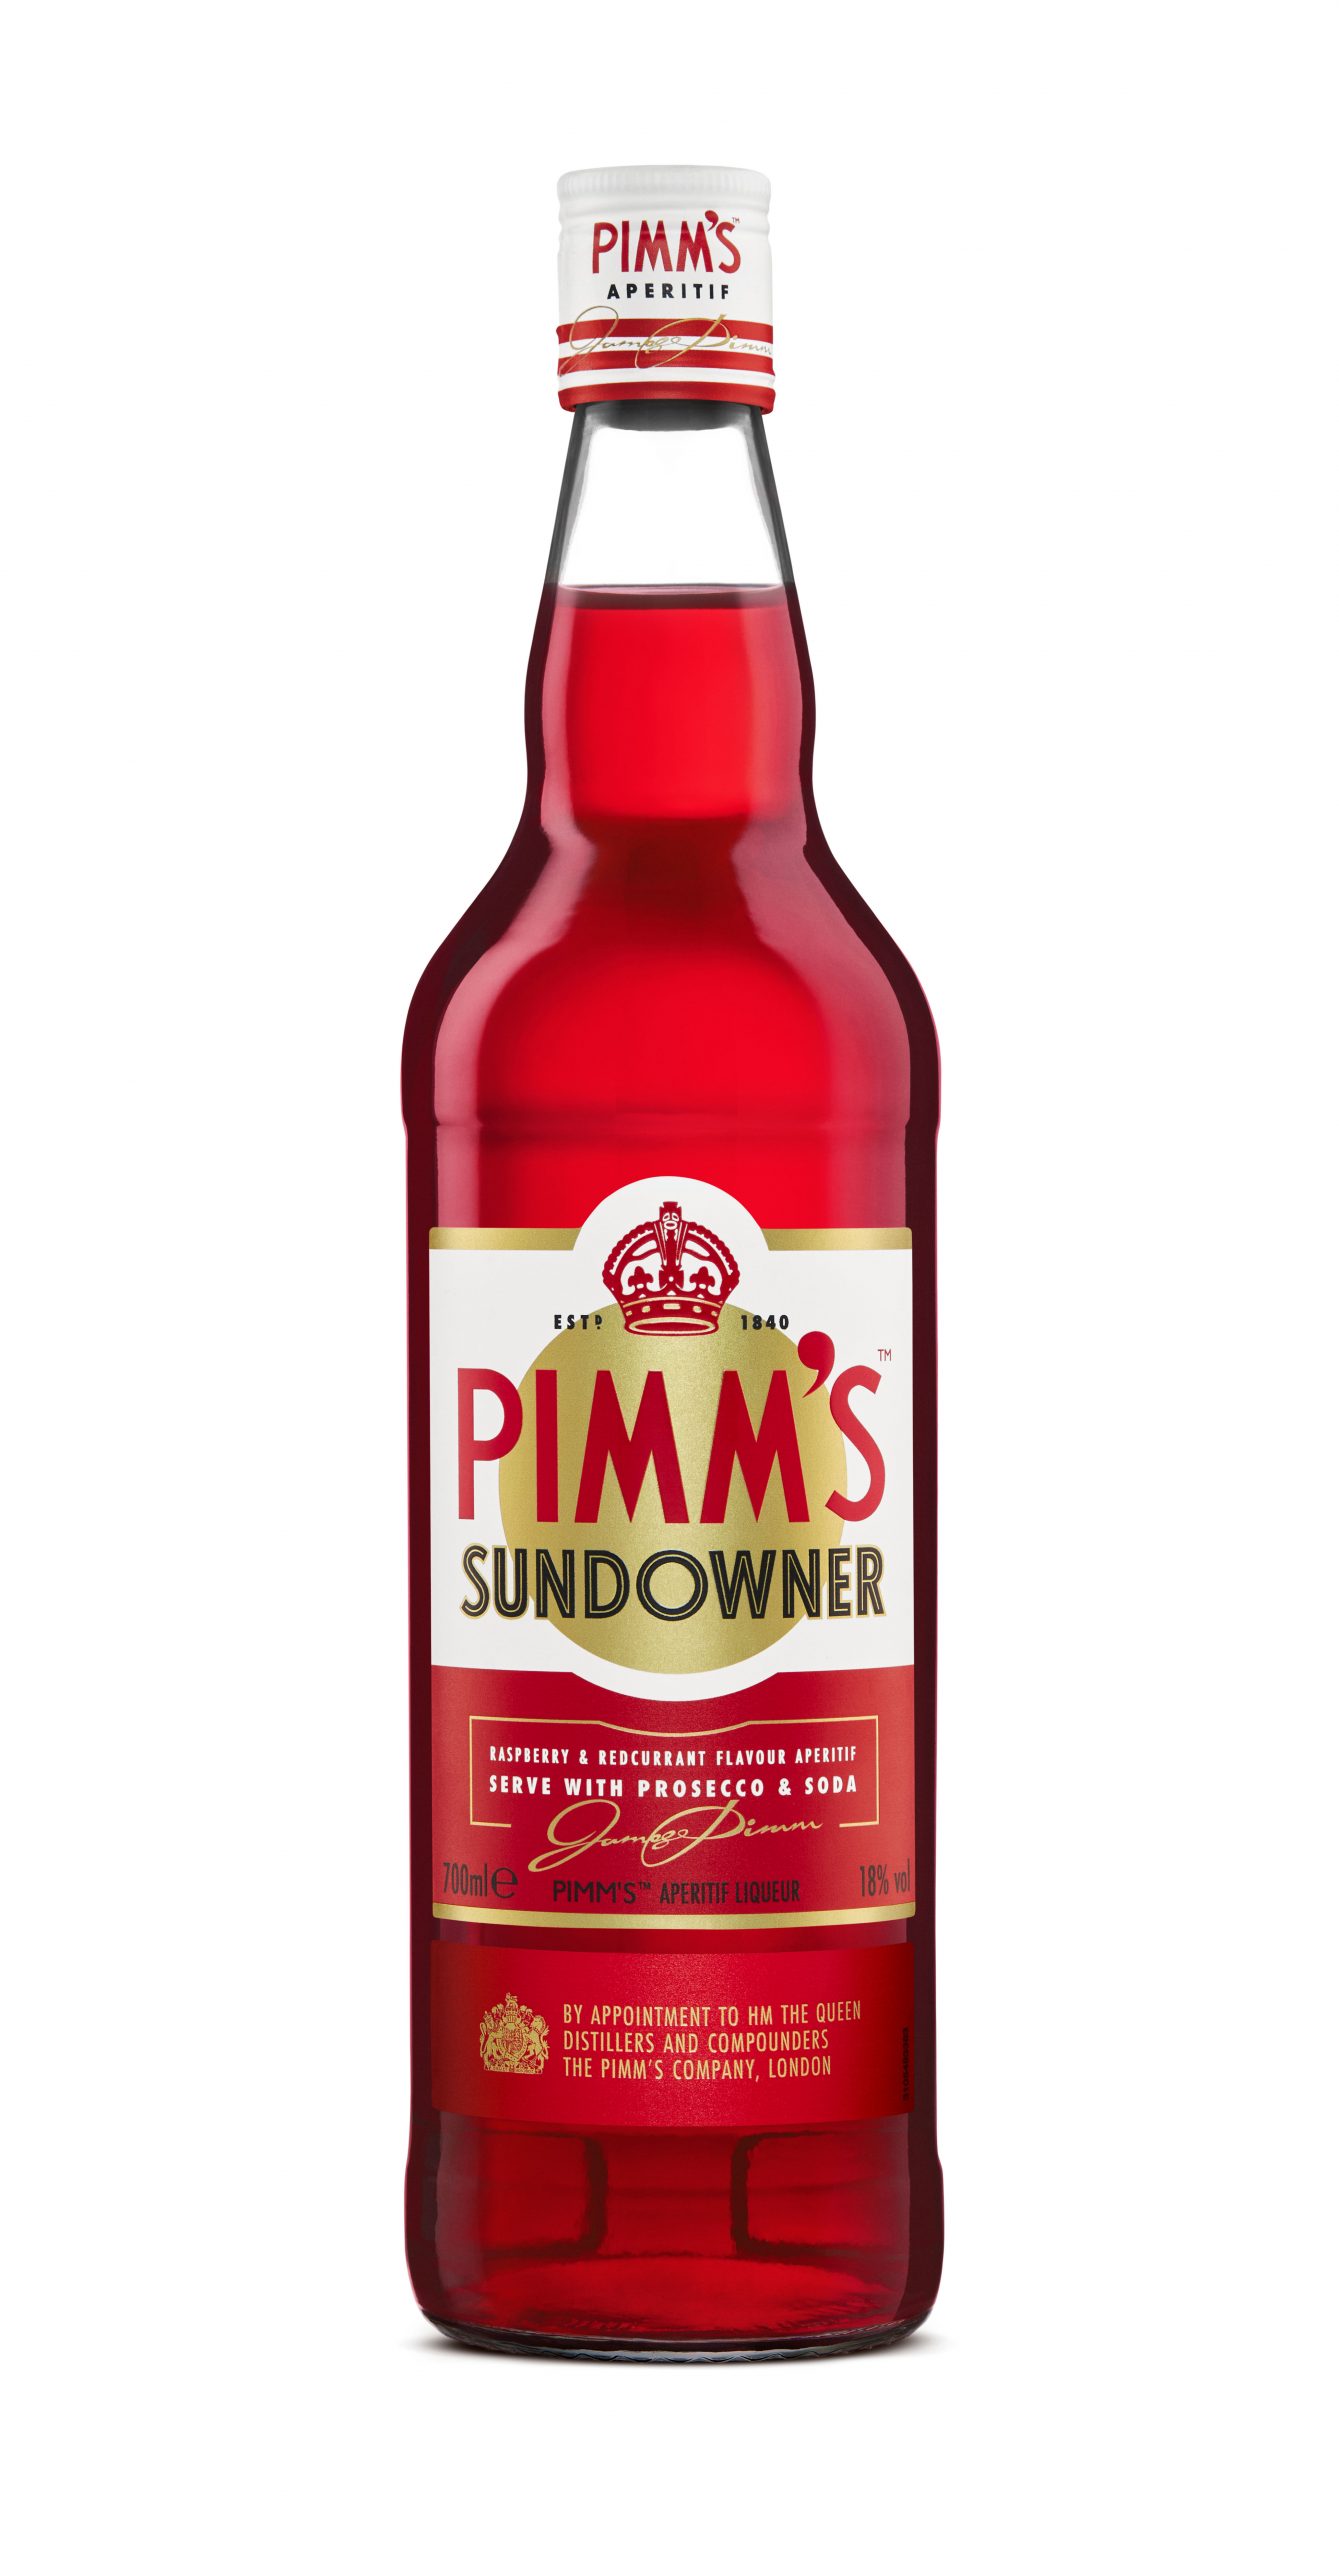 Diageo – updated Pimm’s bottle design; new campaign and drink: the Sundowner